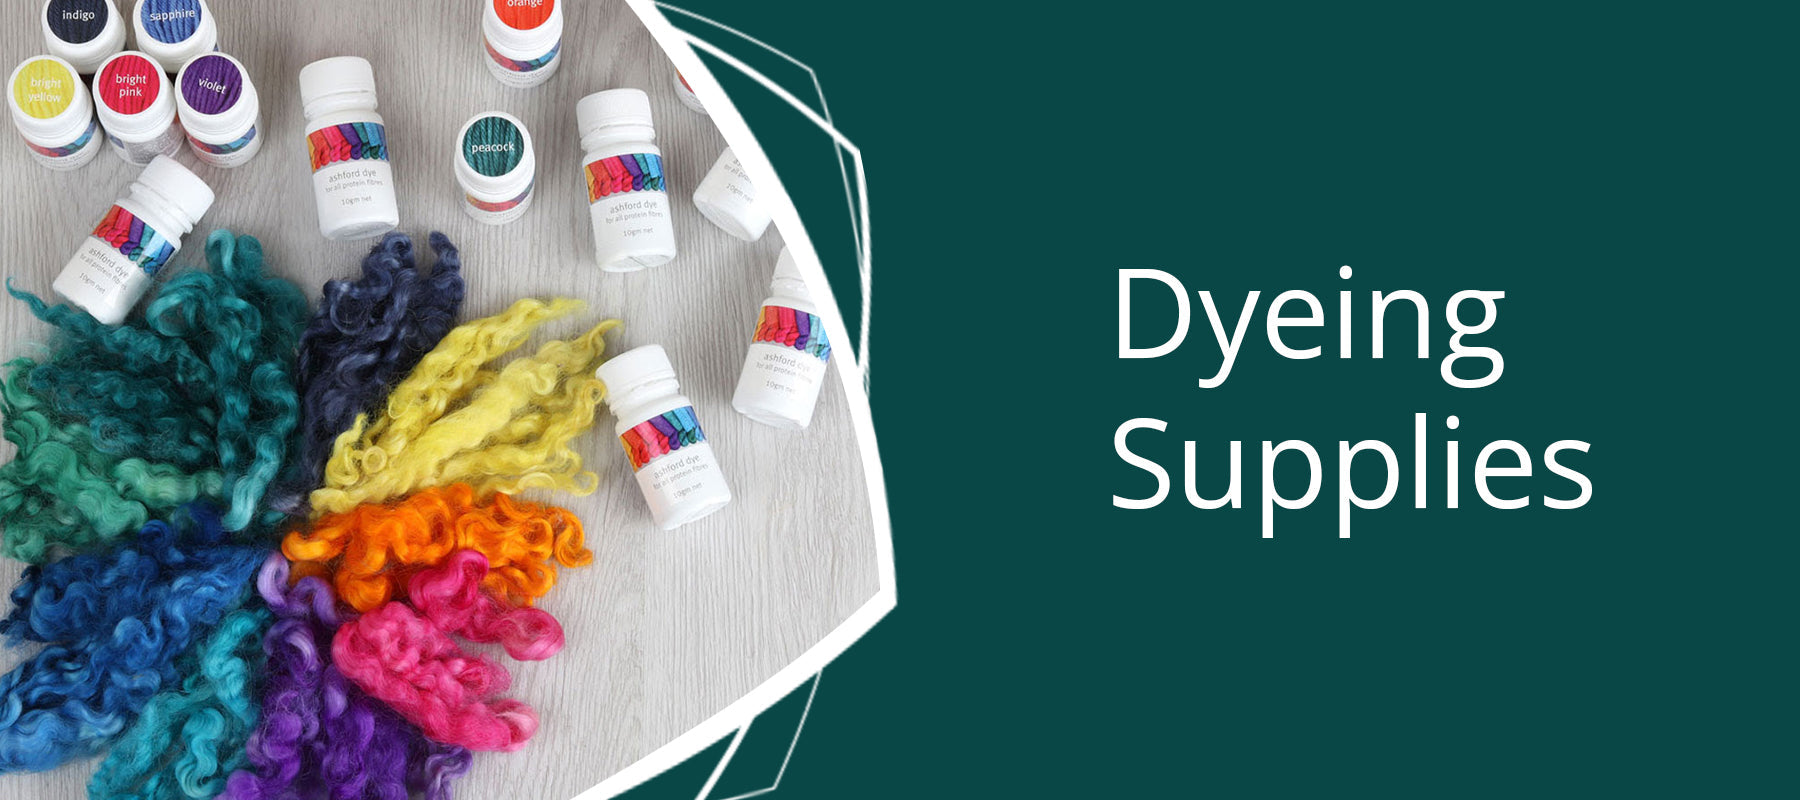 Dyeing Tools & Supplies